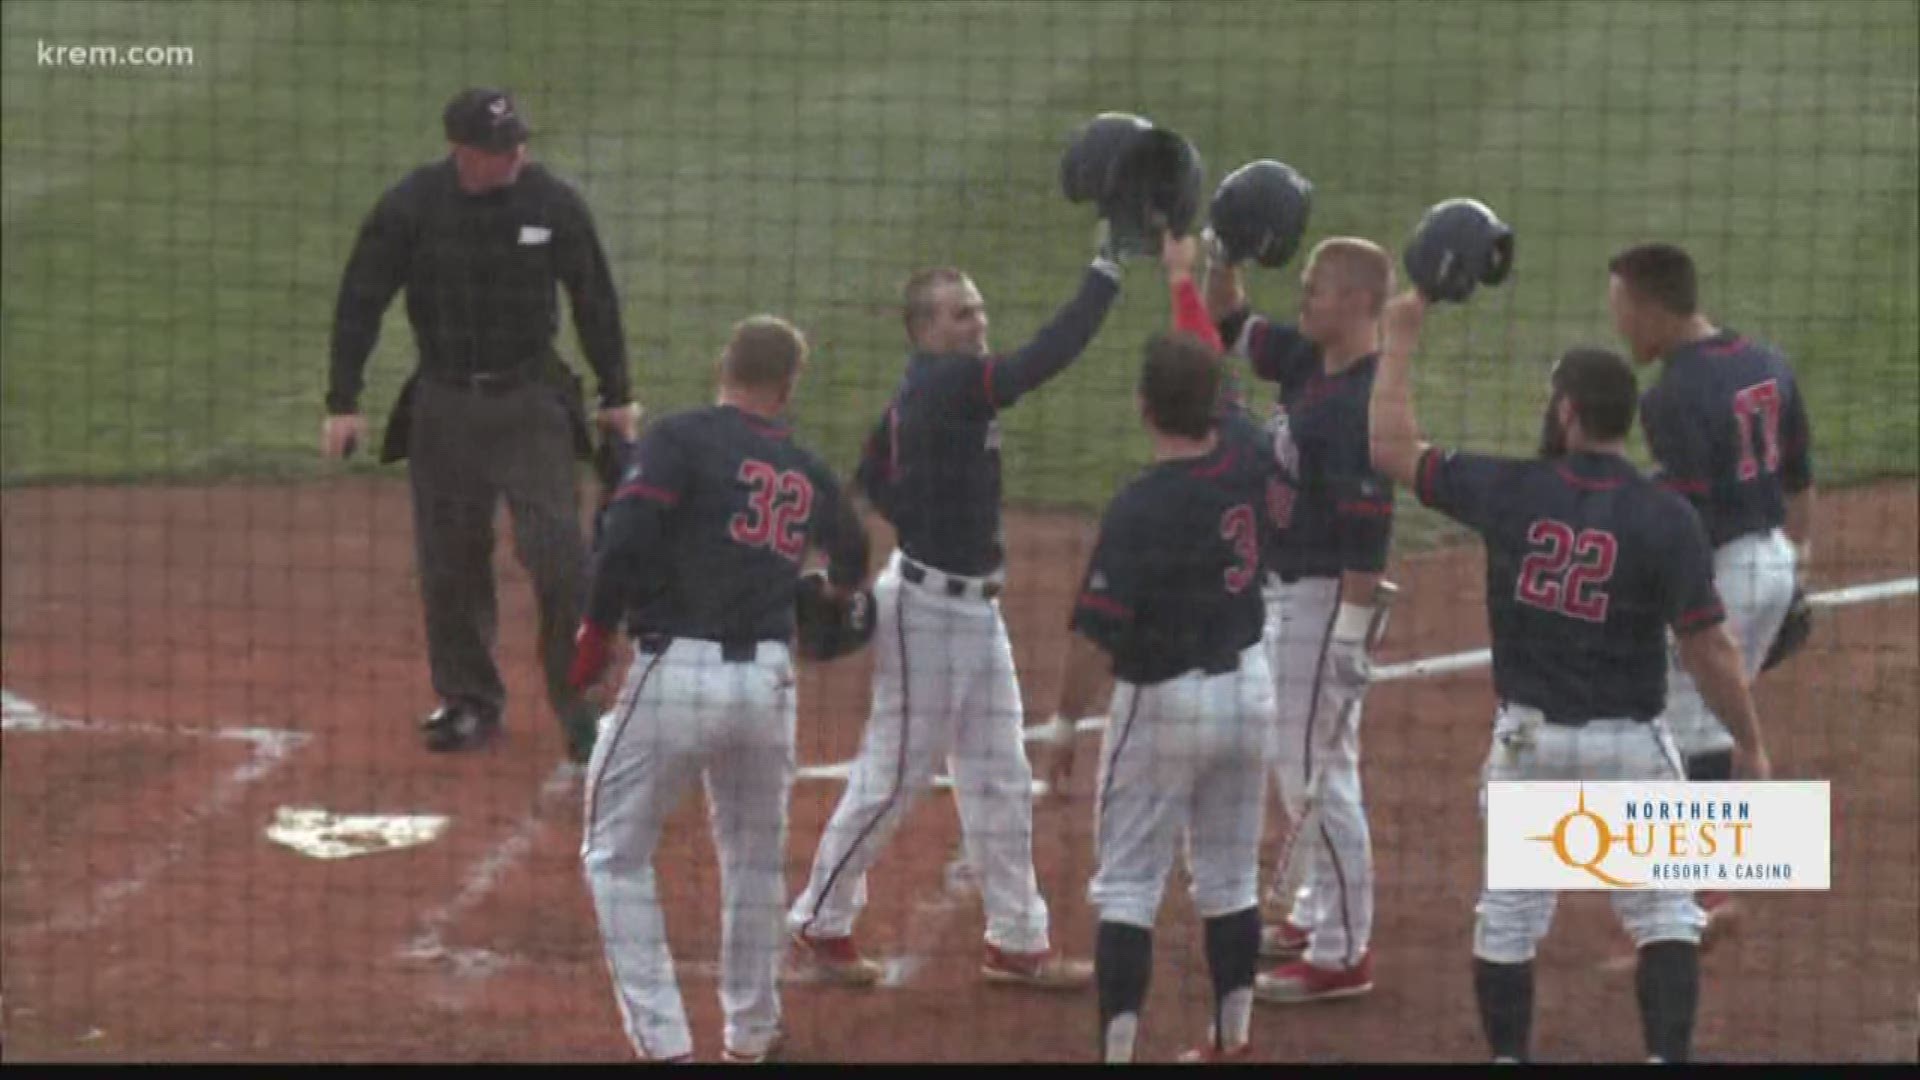 After two rain delays, Gonzaga scores 11 runs in Sunday's win against LMU to take the weekend series.